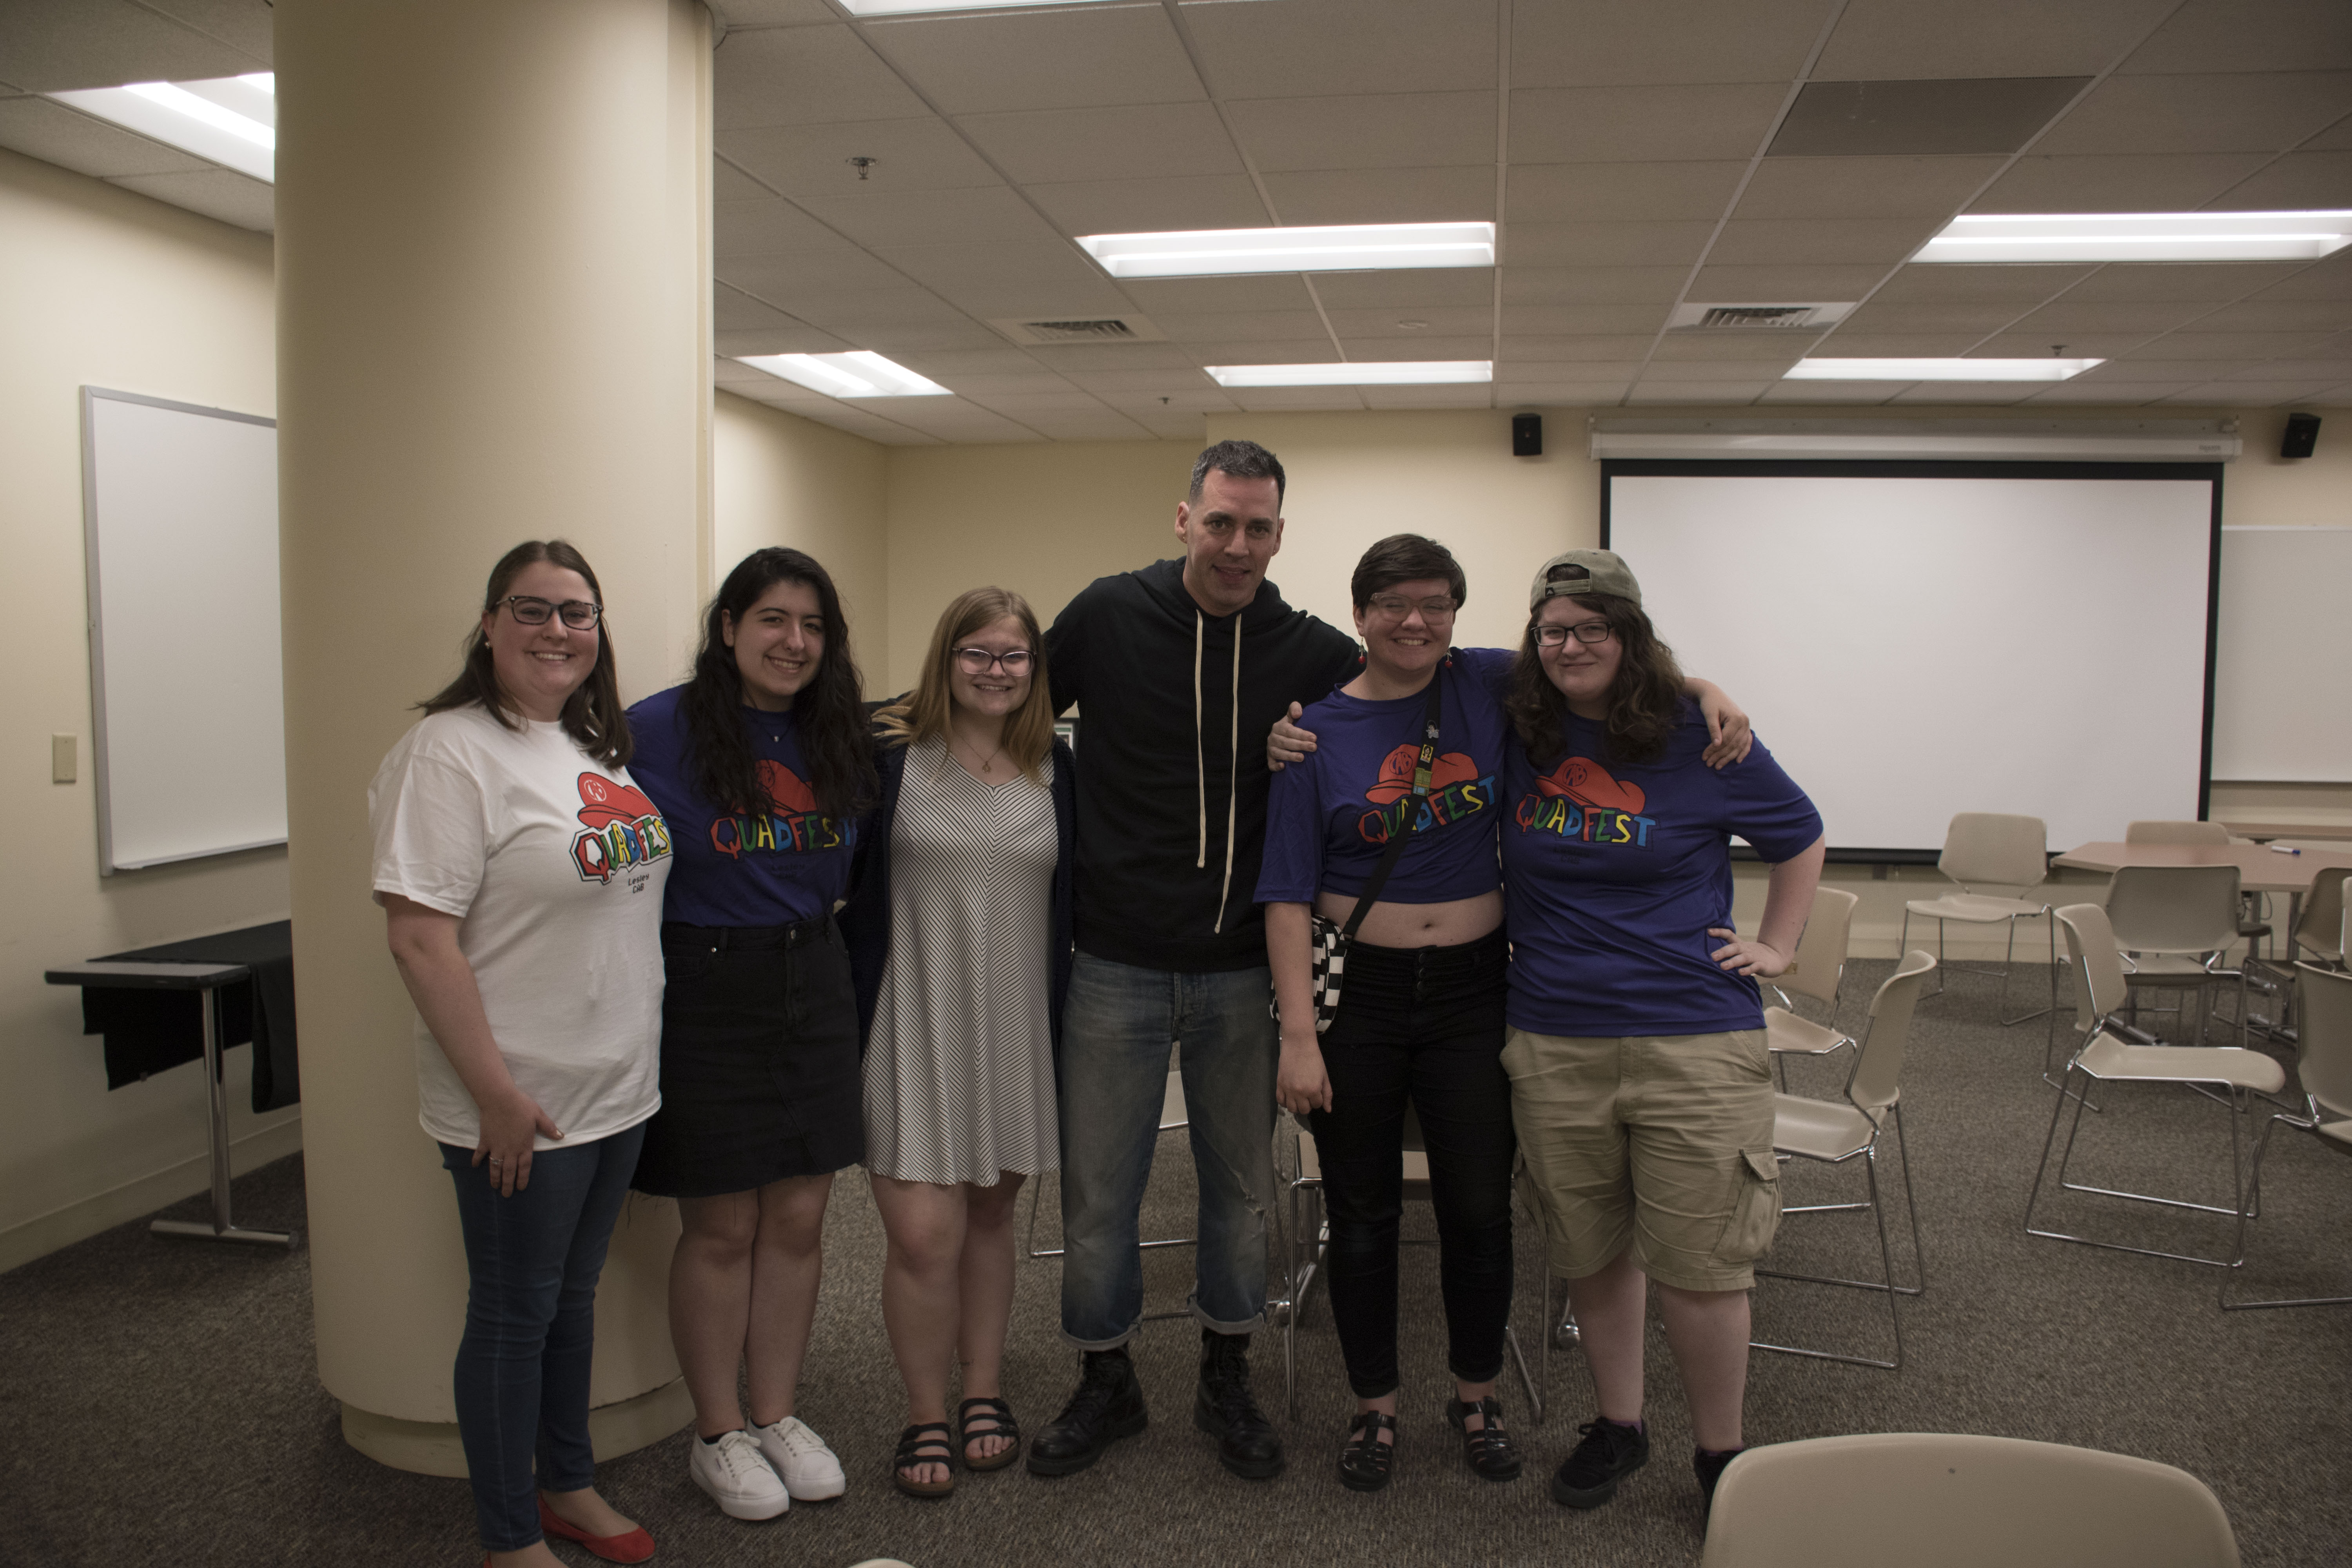 Photograph of 5 students posing with comedian John Roberts.